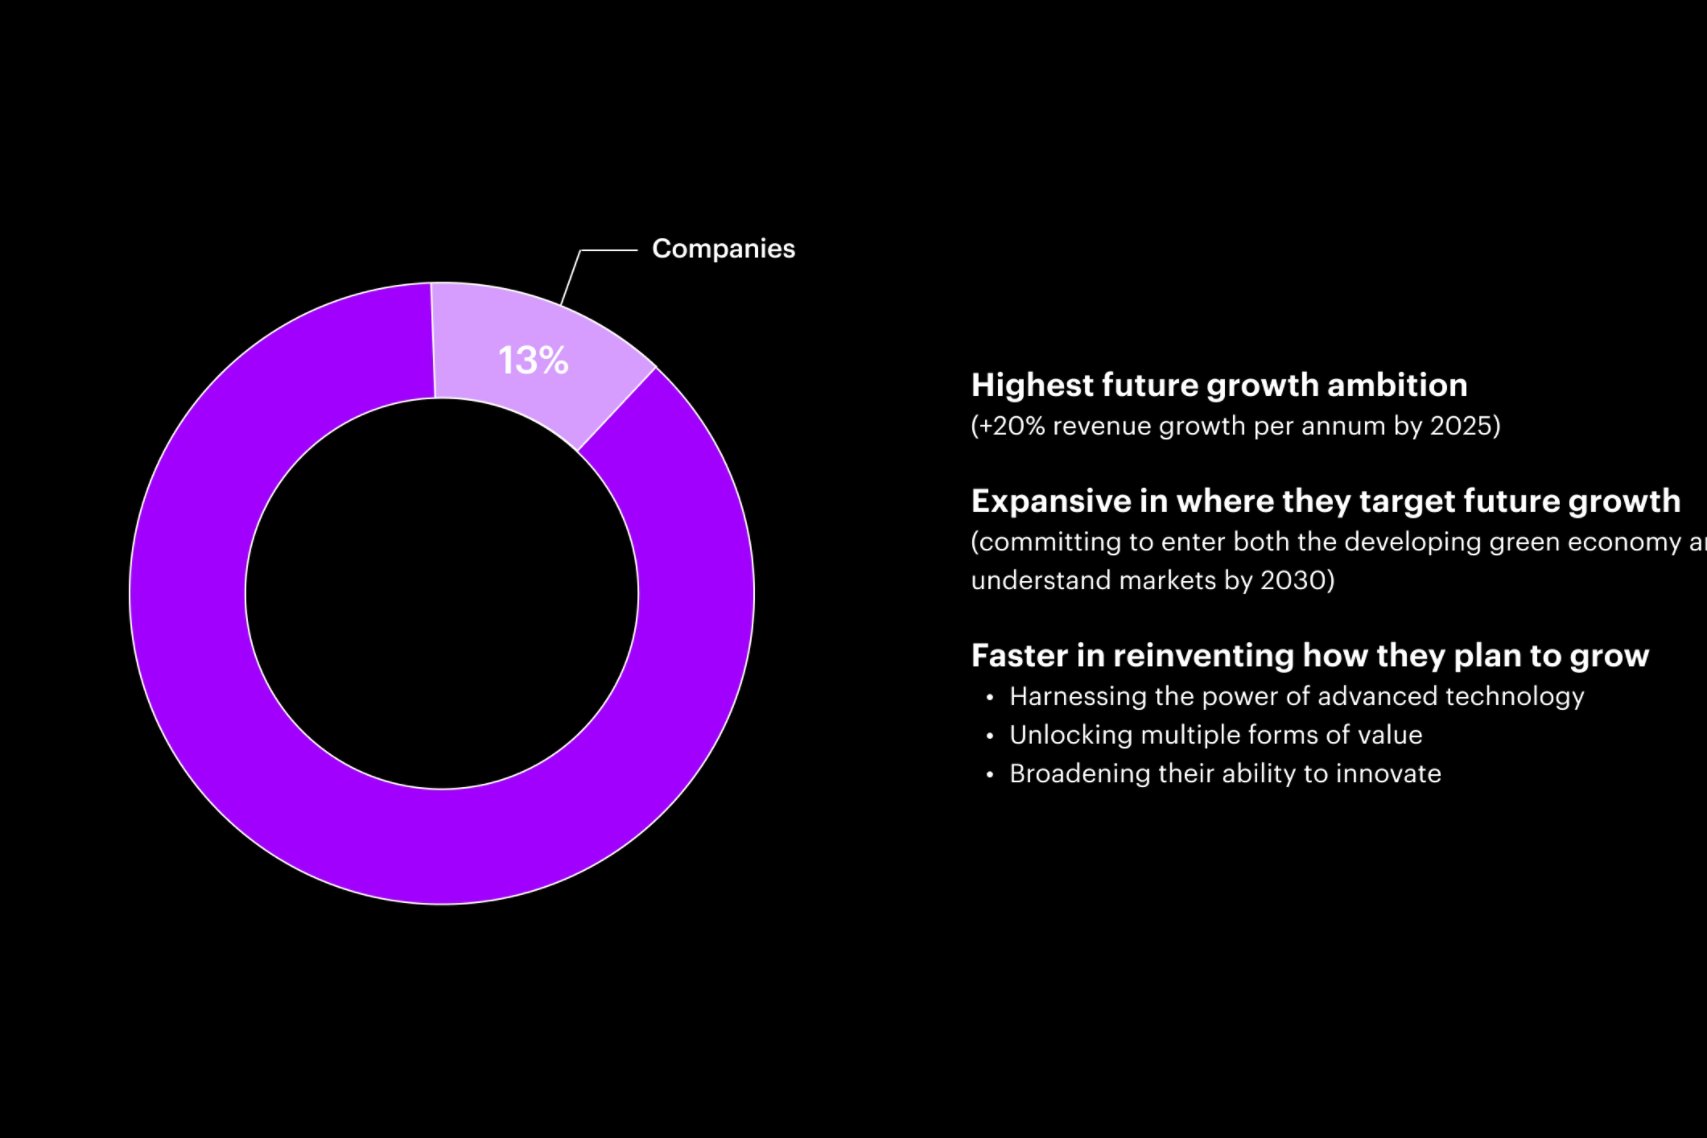 Just 13% of companies in our study are combining a strong growth ambition with new directions and bolder actions.